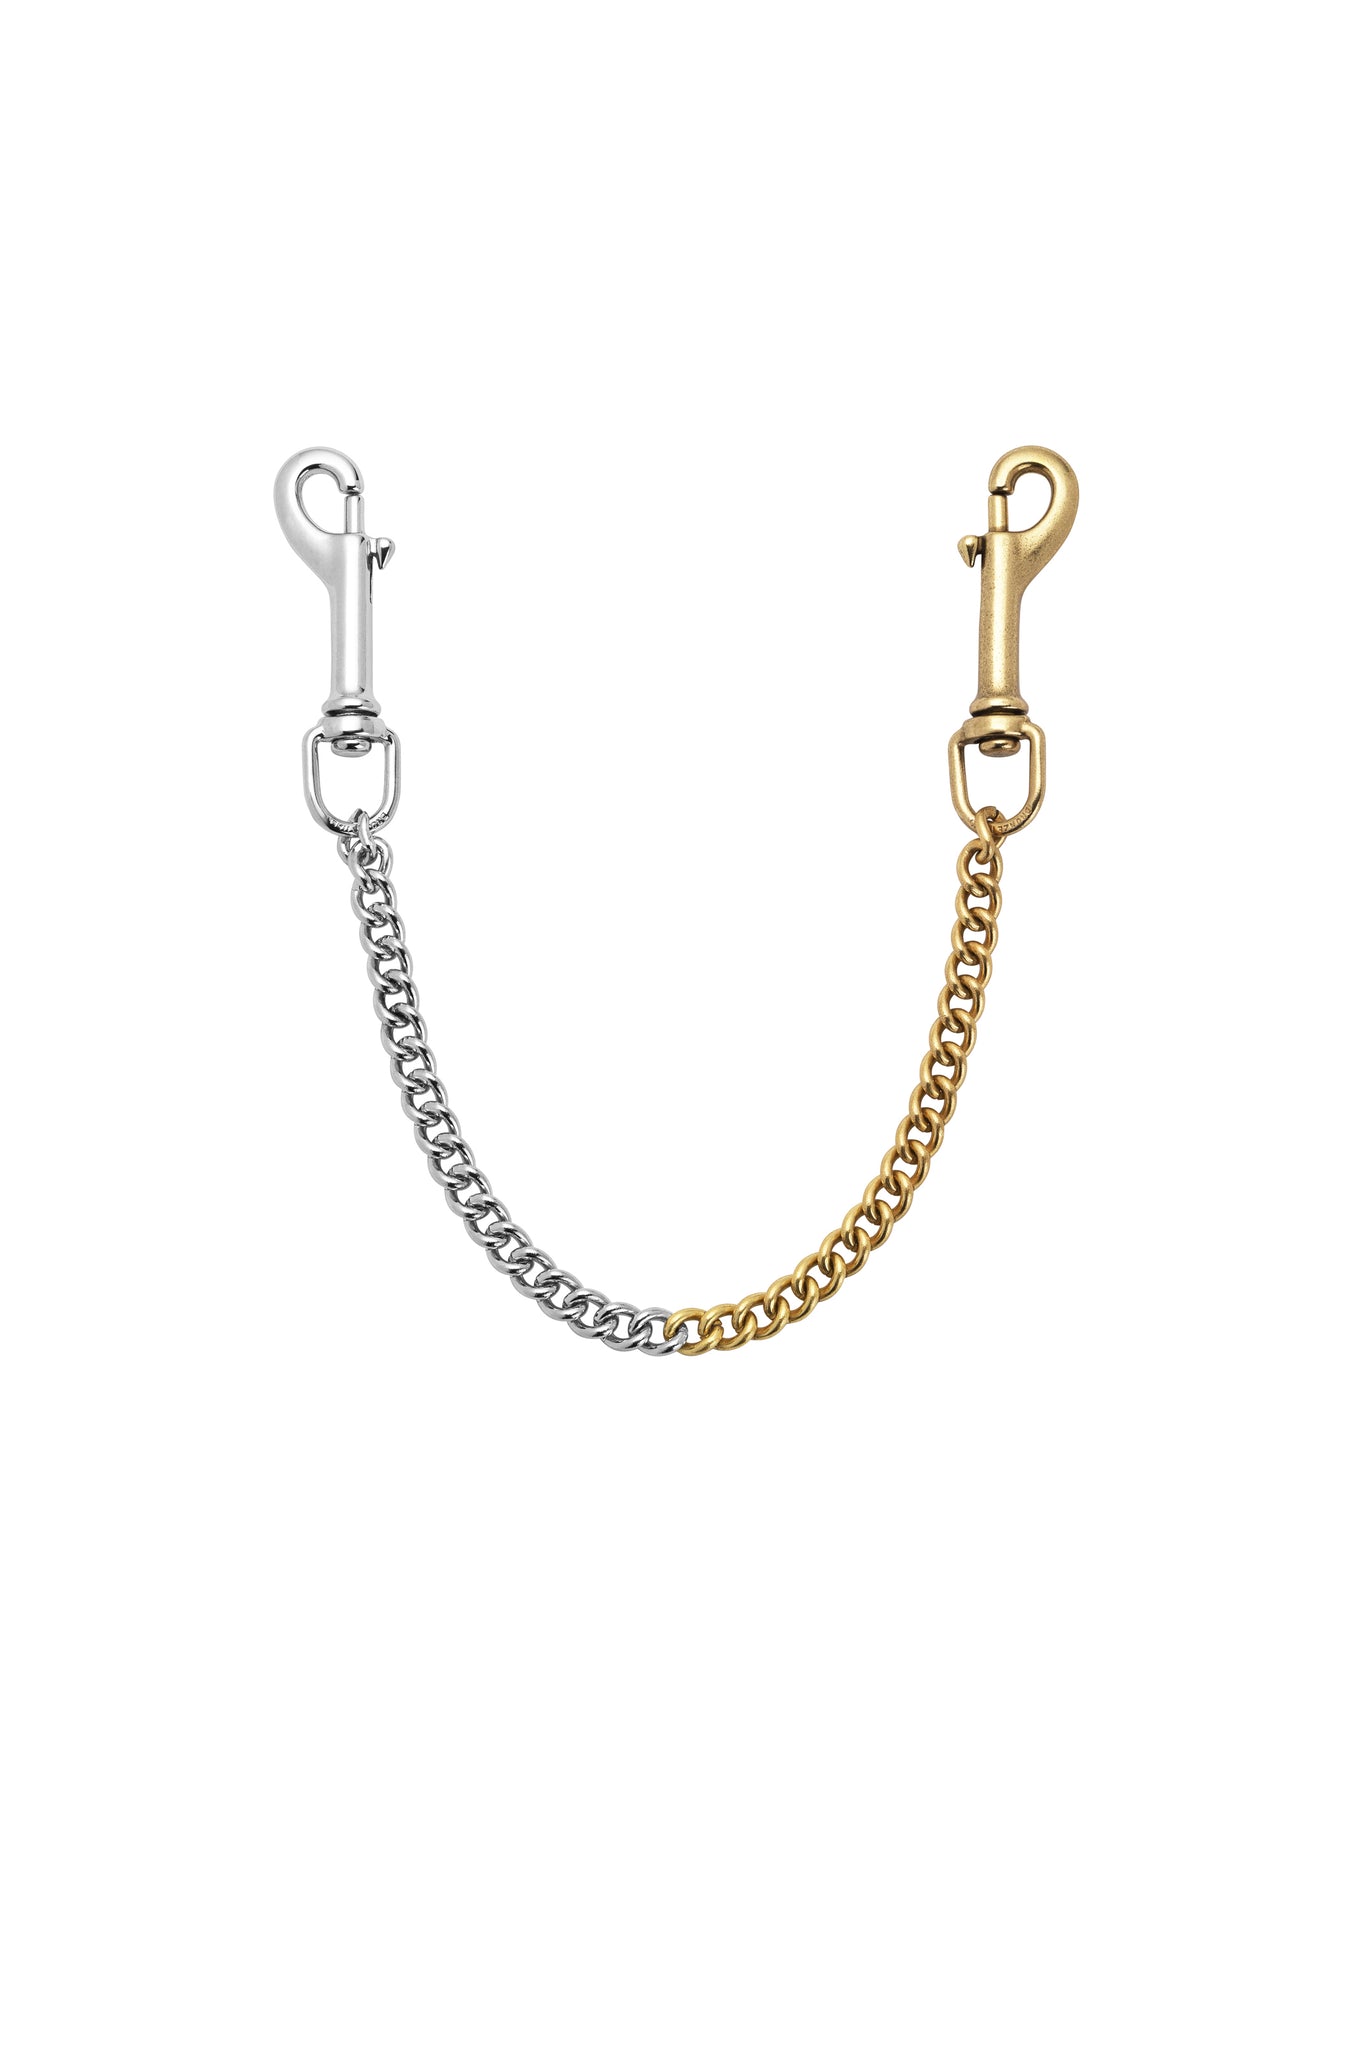 Mixed Metal Chain with Pavé Clasp – Devon Road Jewelry